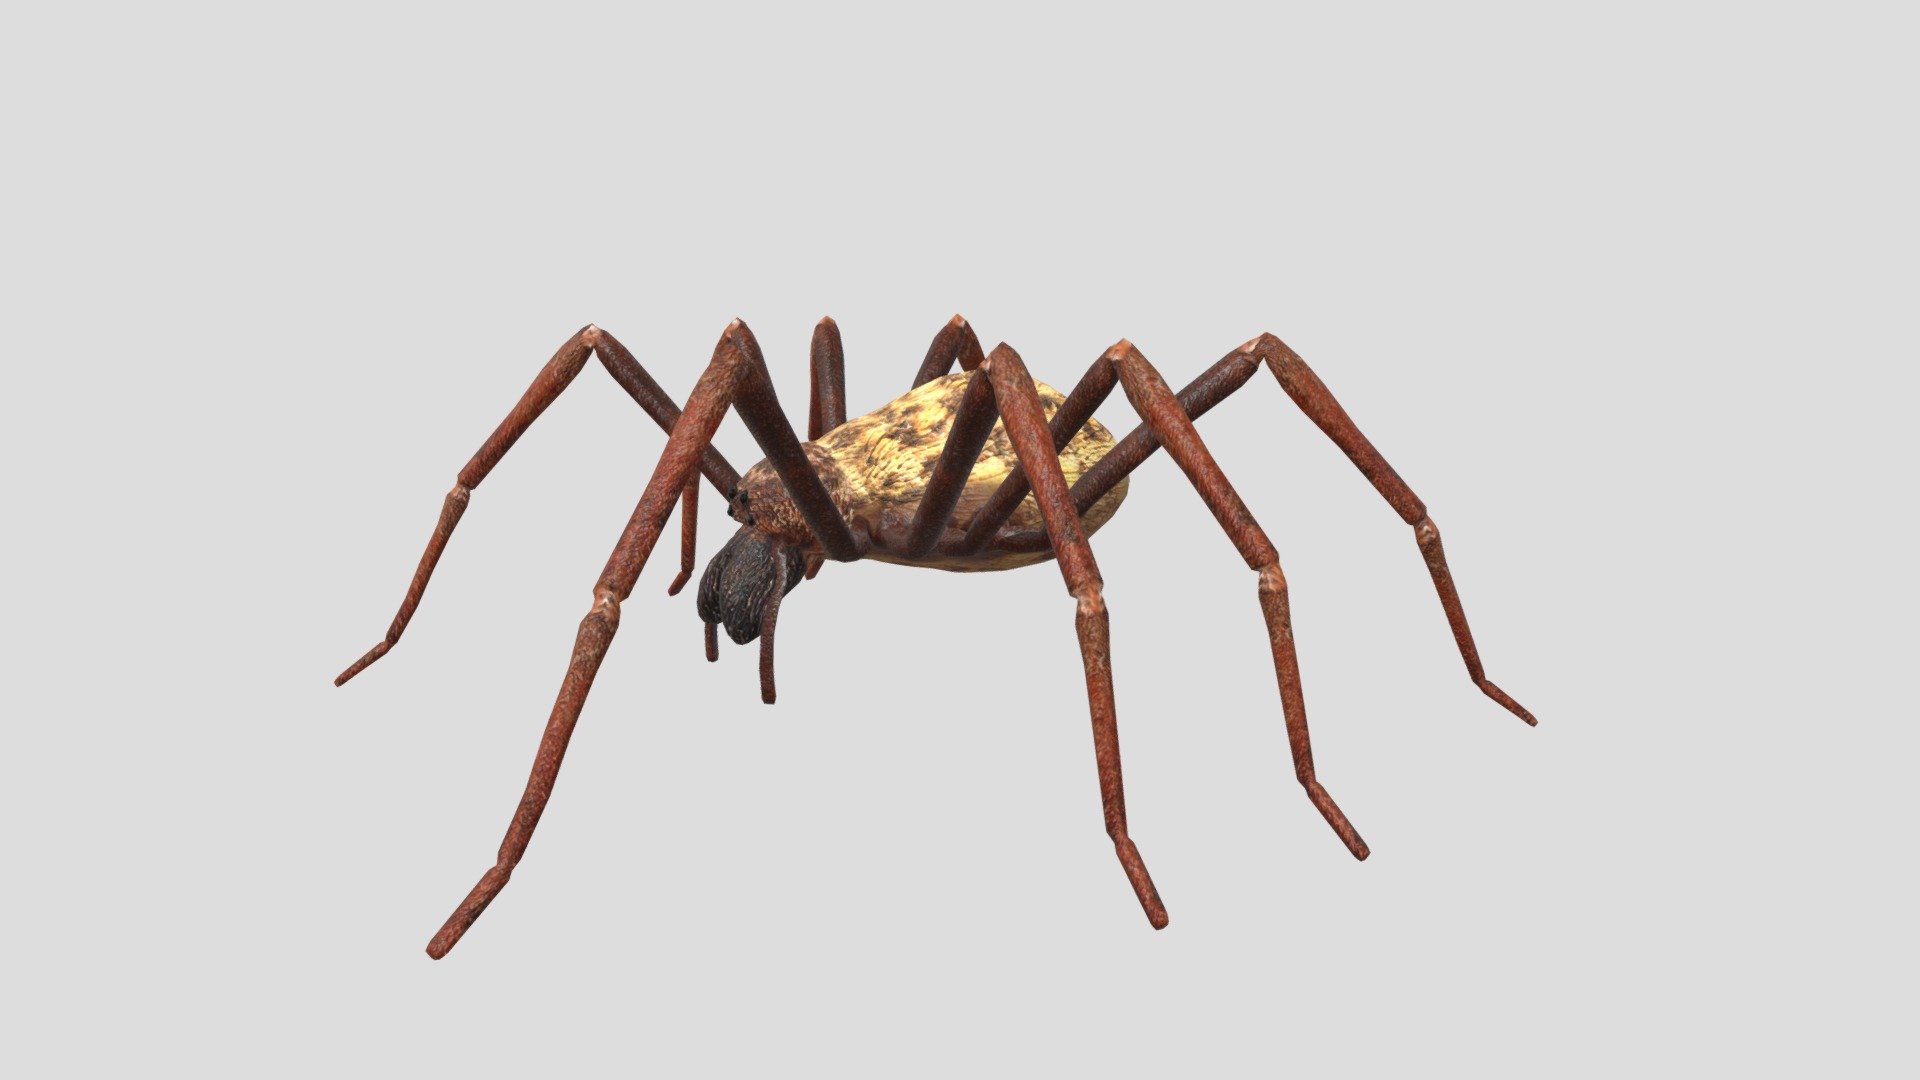 Digital 3d model of house spider.

The product includes:

-The model is one single object

-All textures and materials are mapped in every format.

-Textures JPEG- color,normal,specular and roughness maps.

-Texture size 2048 x 2048 pxls.

-No special plugin needed to open scene 3d model